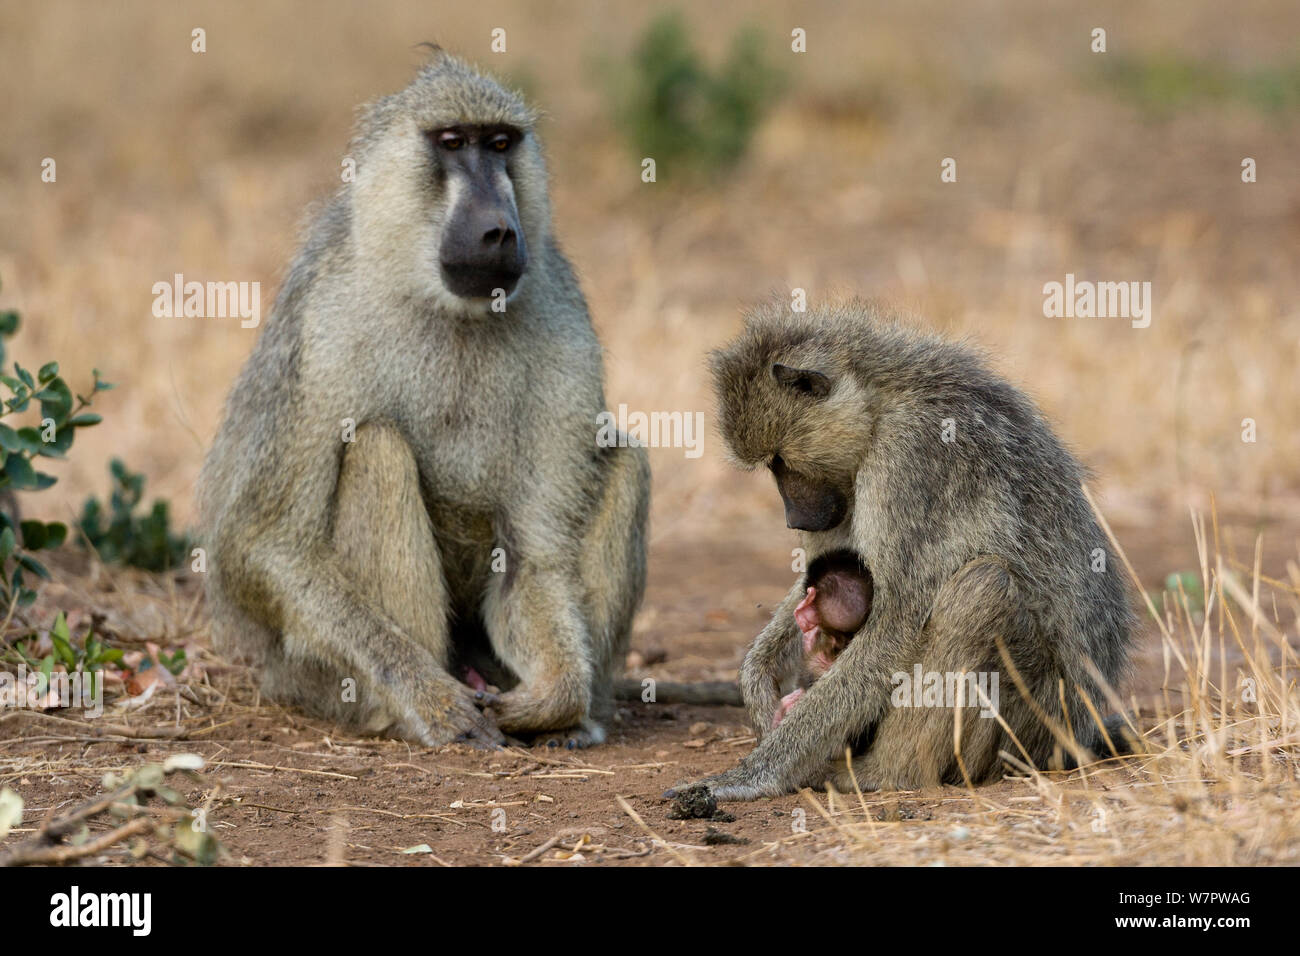 yellow baboon (Papio hamadryas cynocephalus) male looking at a mother and its baby, Tsavo East National Park, Kenya Stock Photo